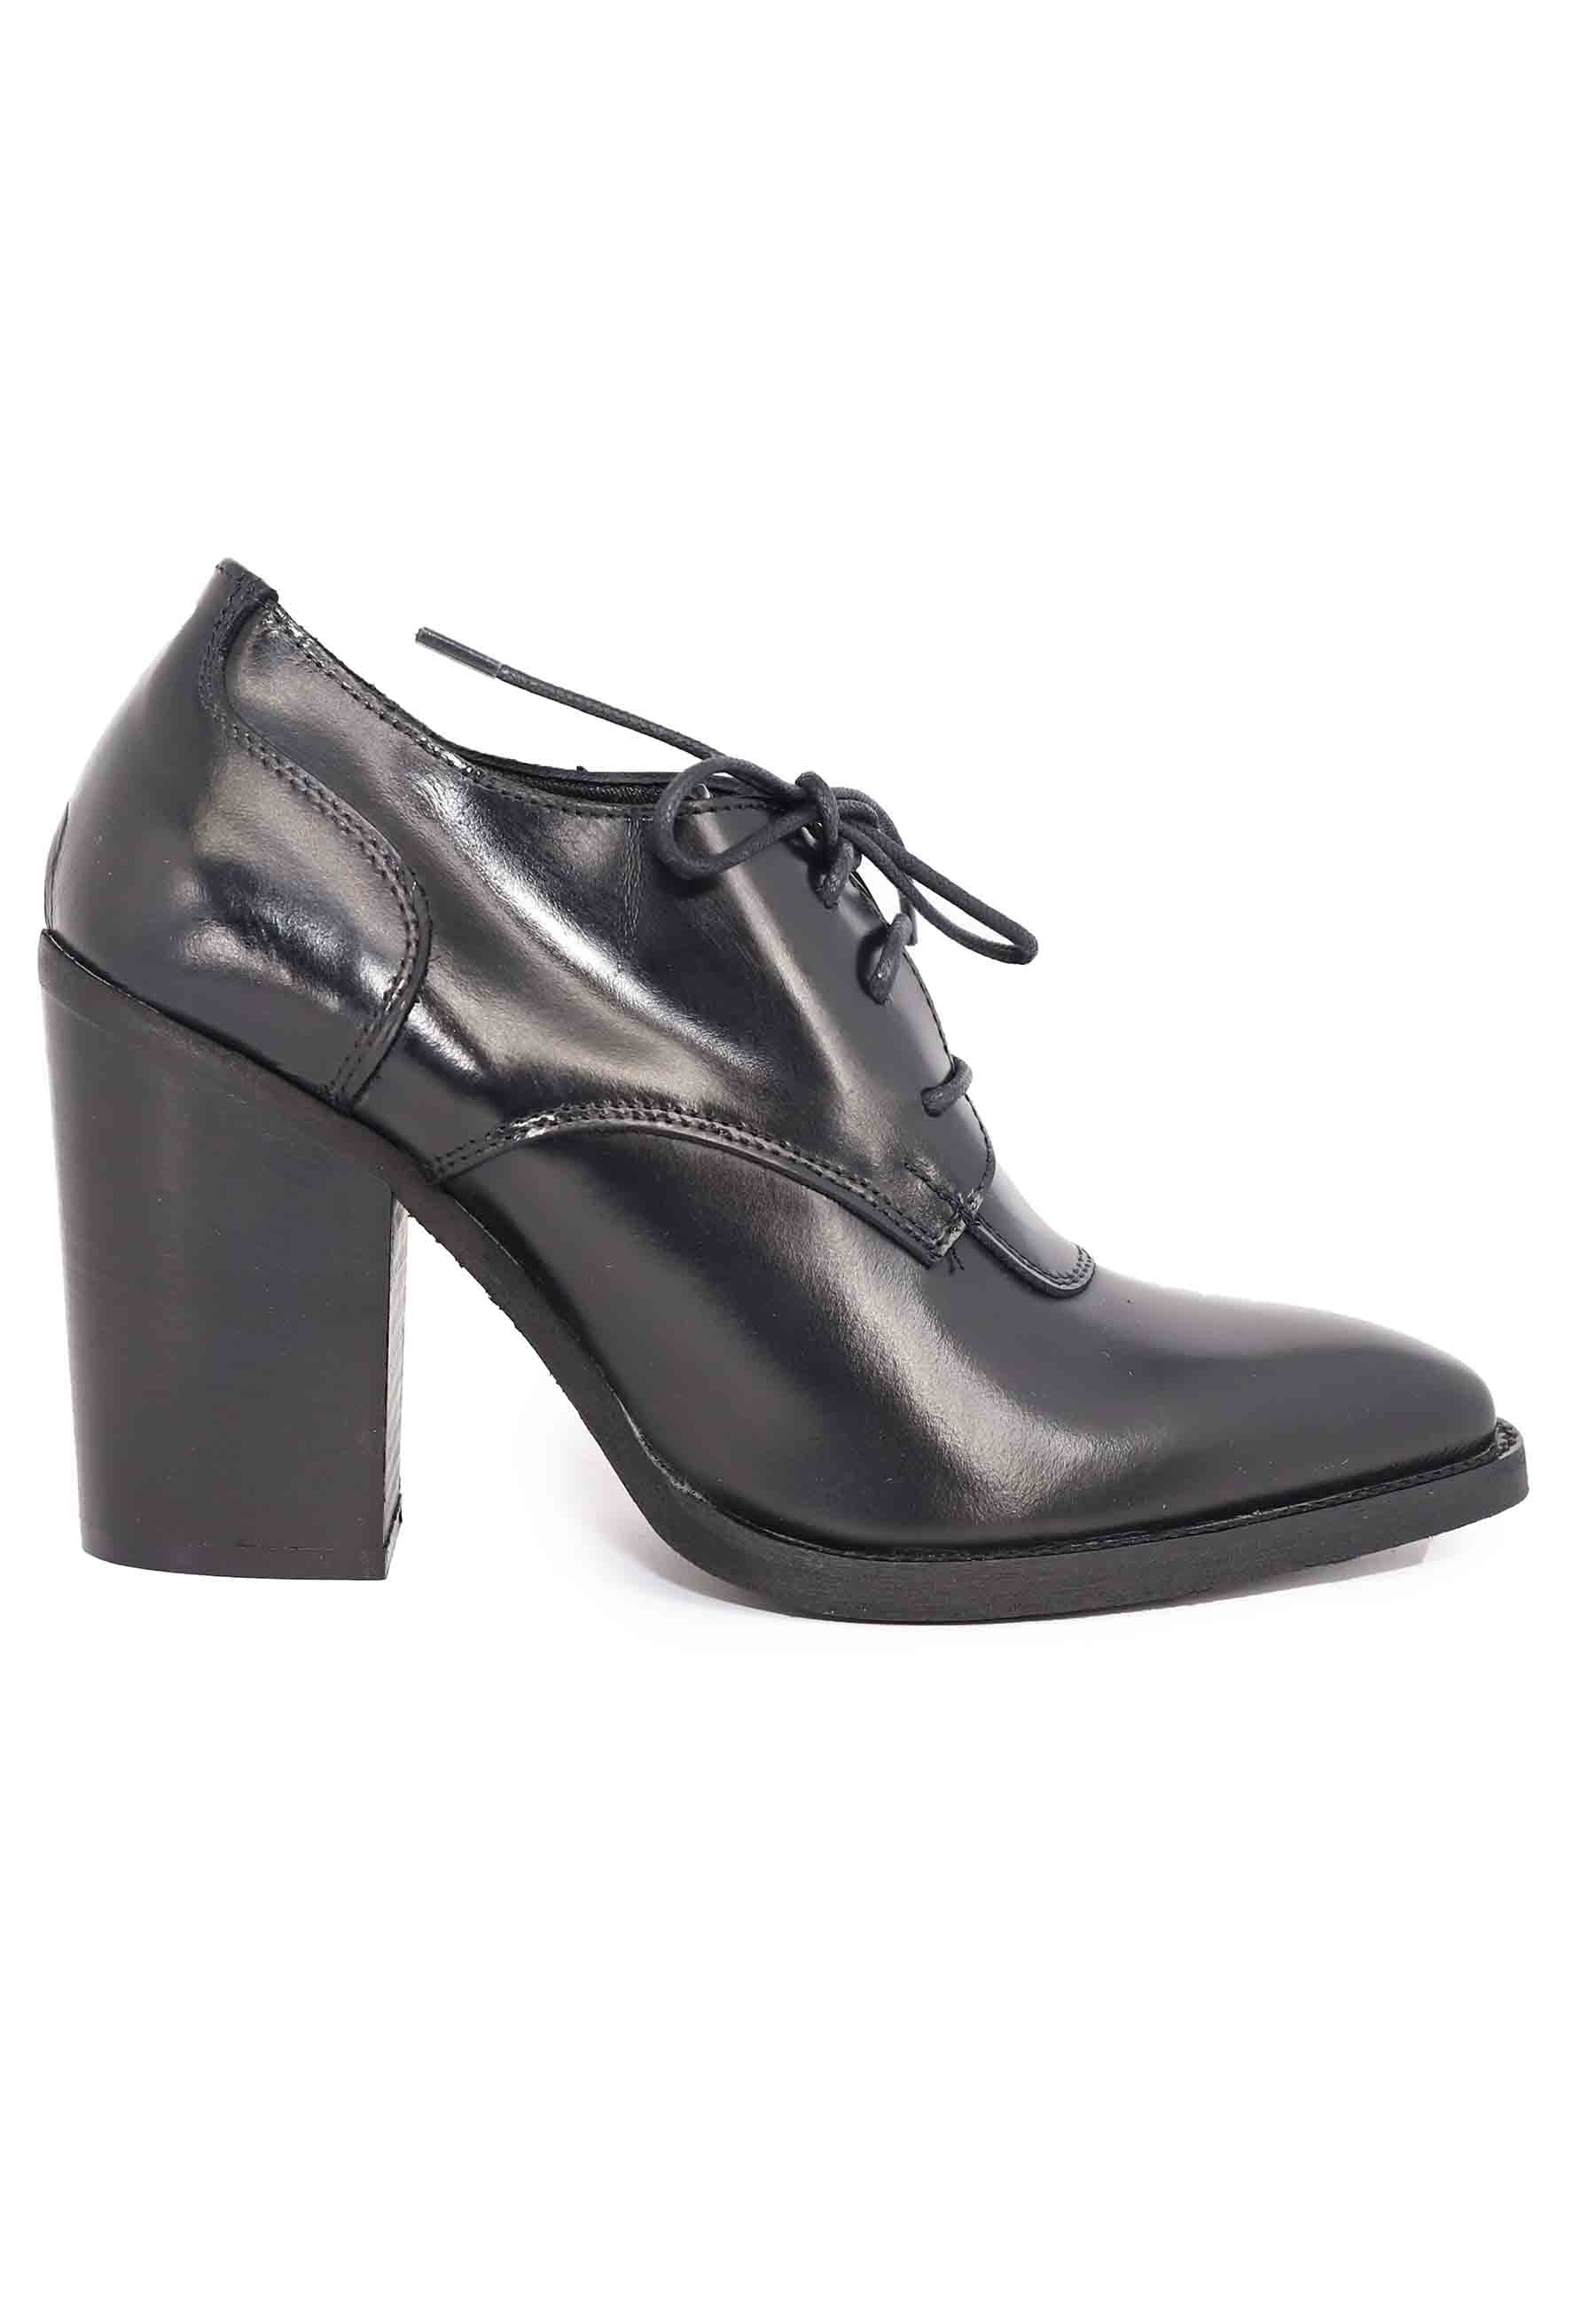 Women's black leather lace-ups with high heel and pointed toe